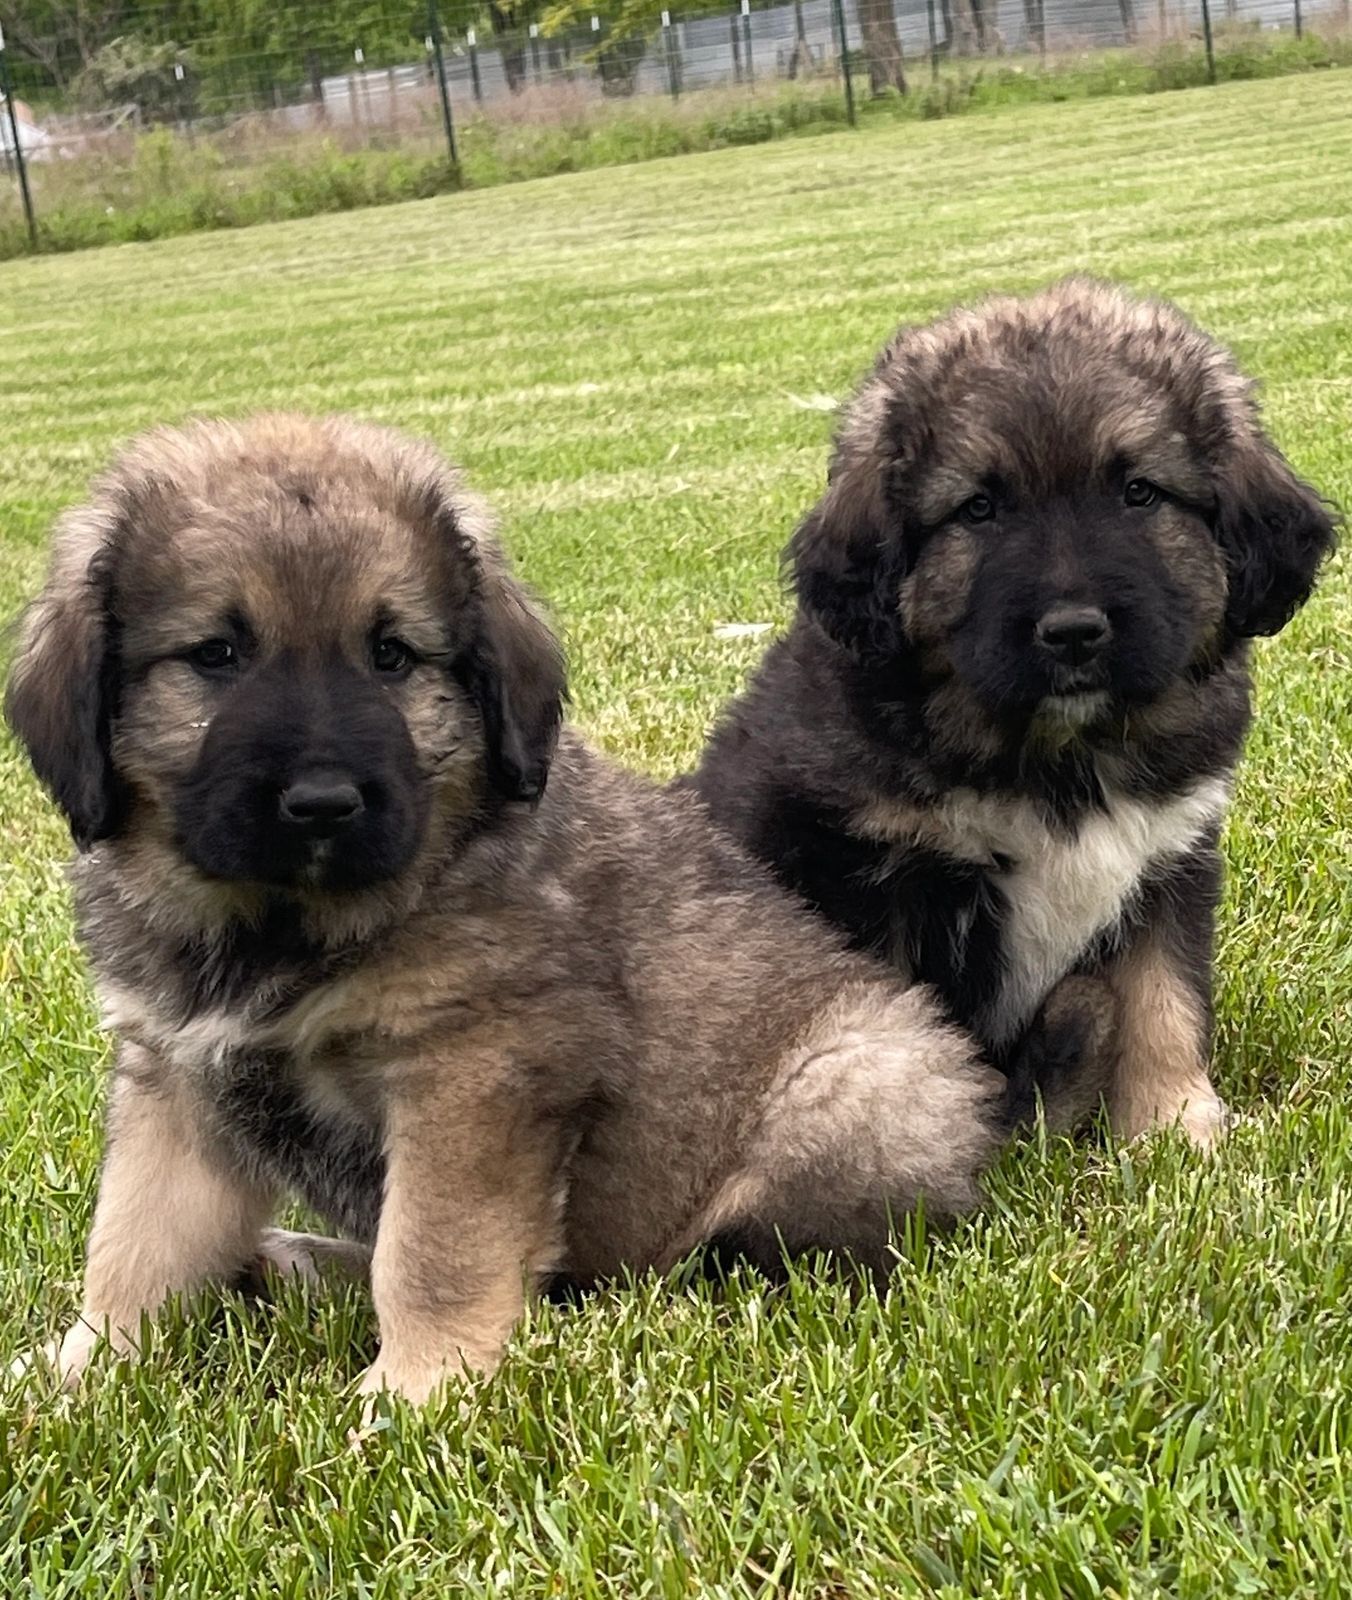 Two of our puppies from Litter H